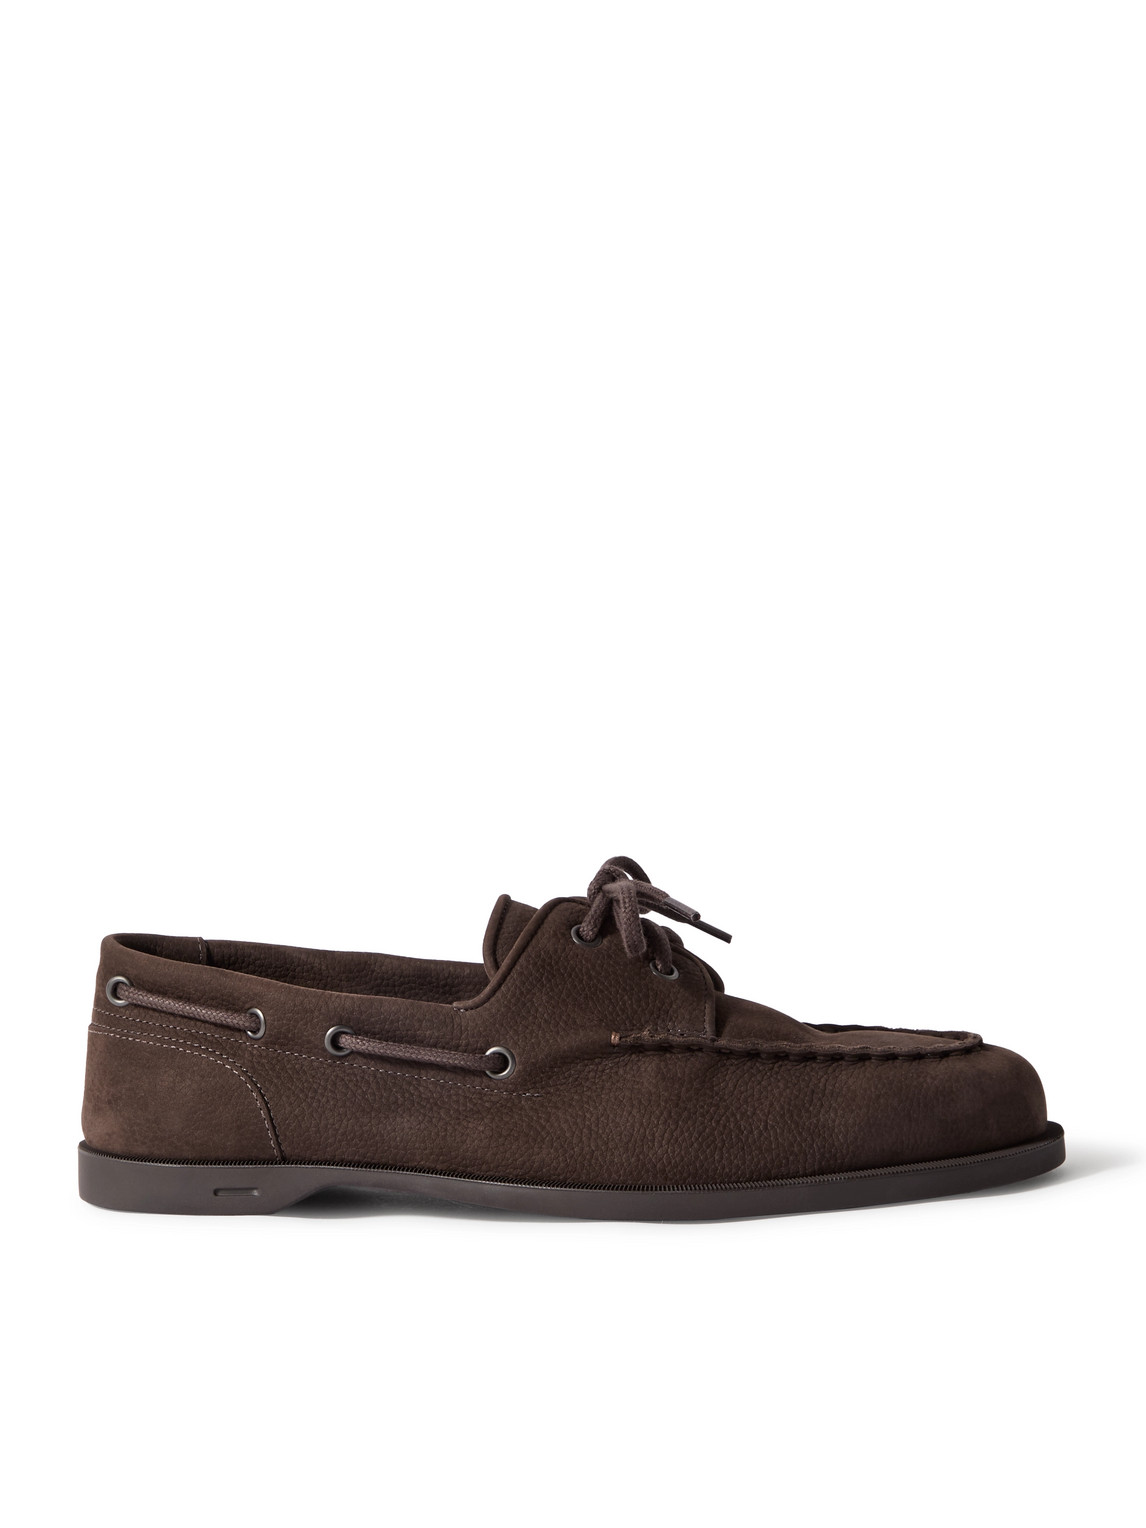 John Lobb Foil Leather Boat Shoes In Brown